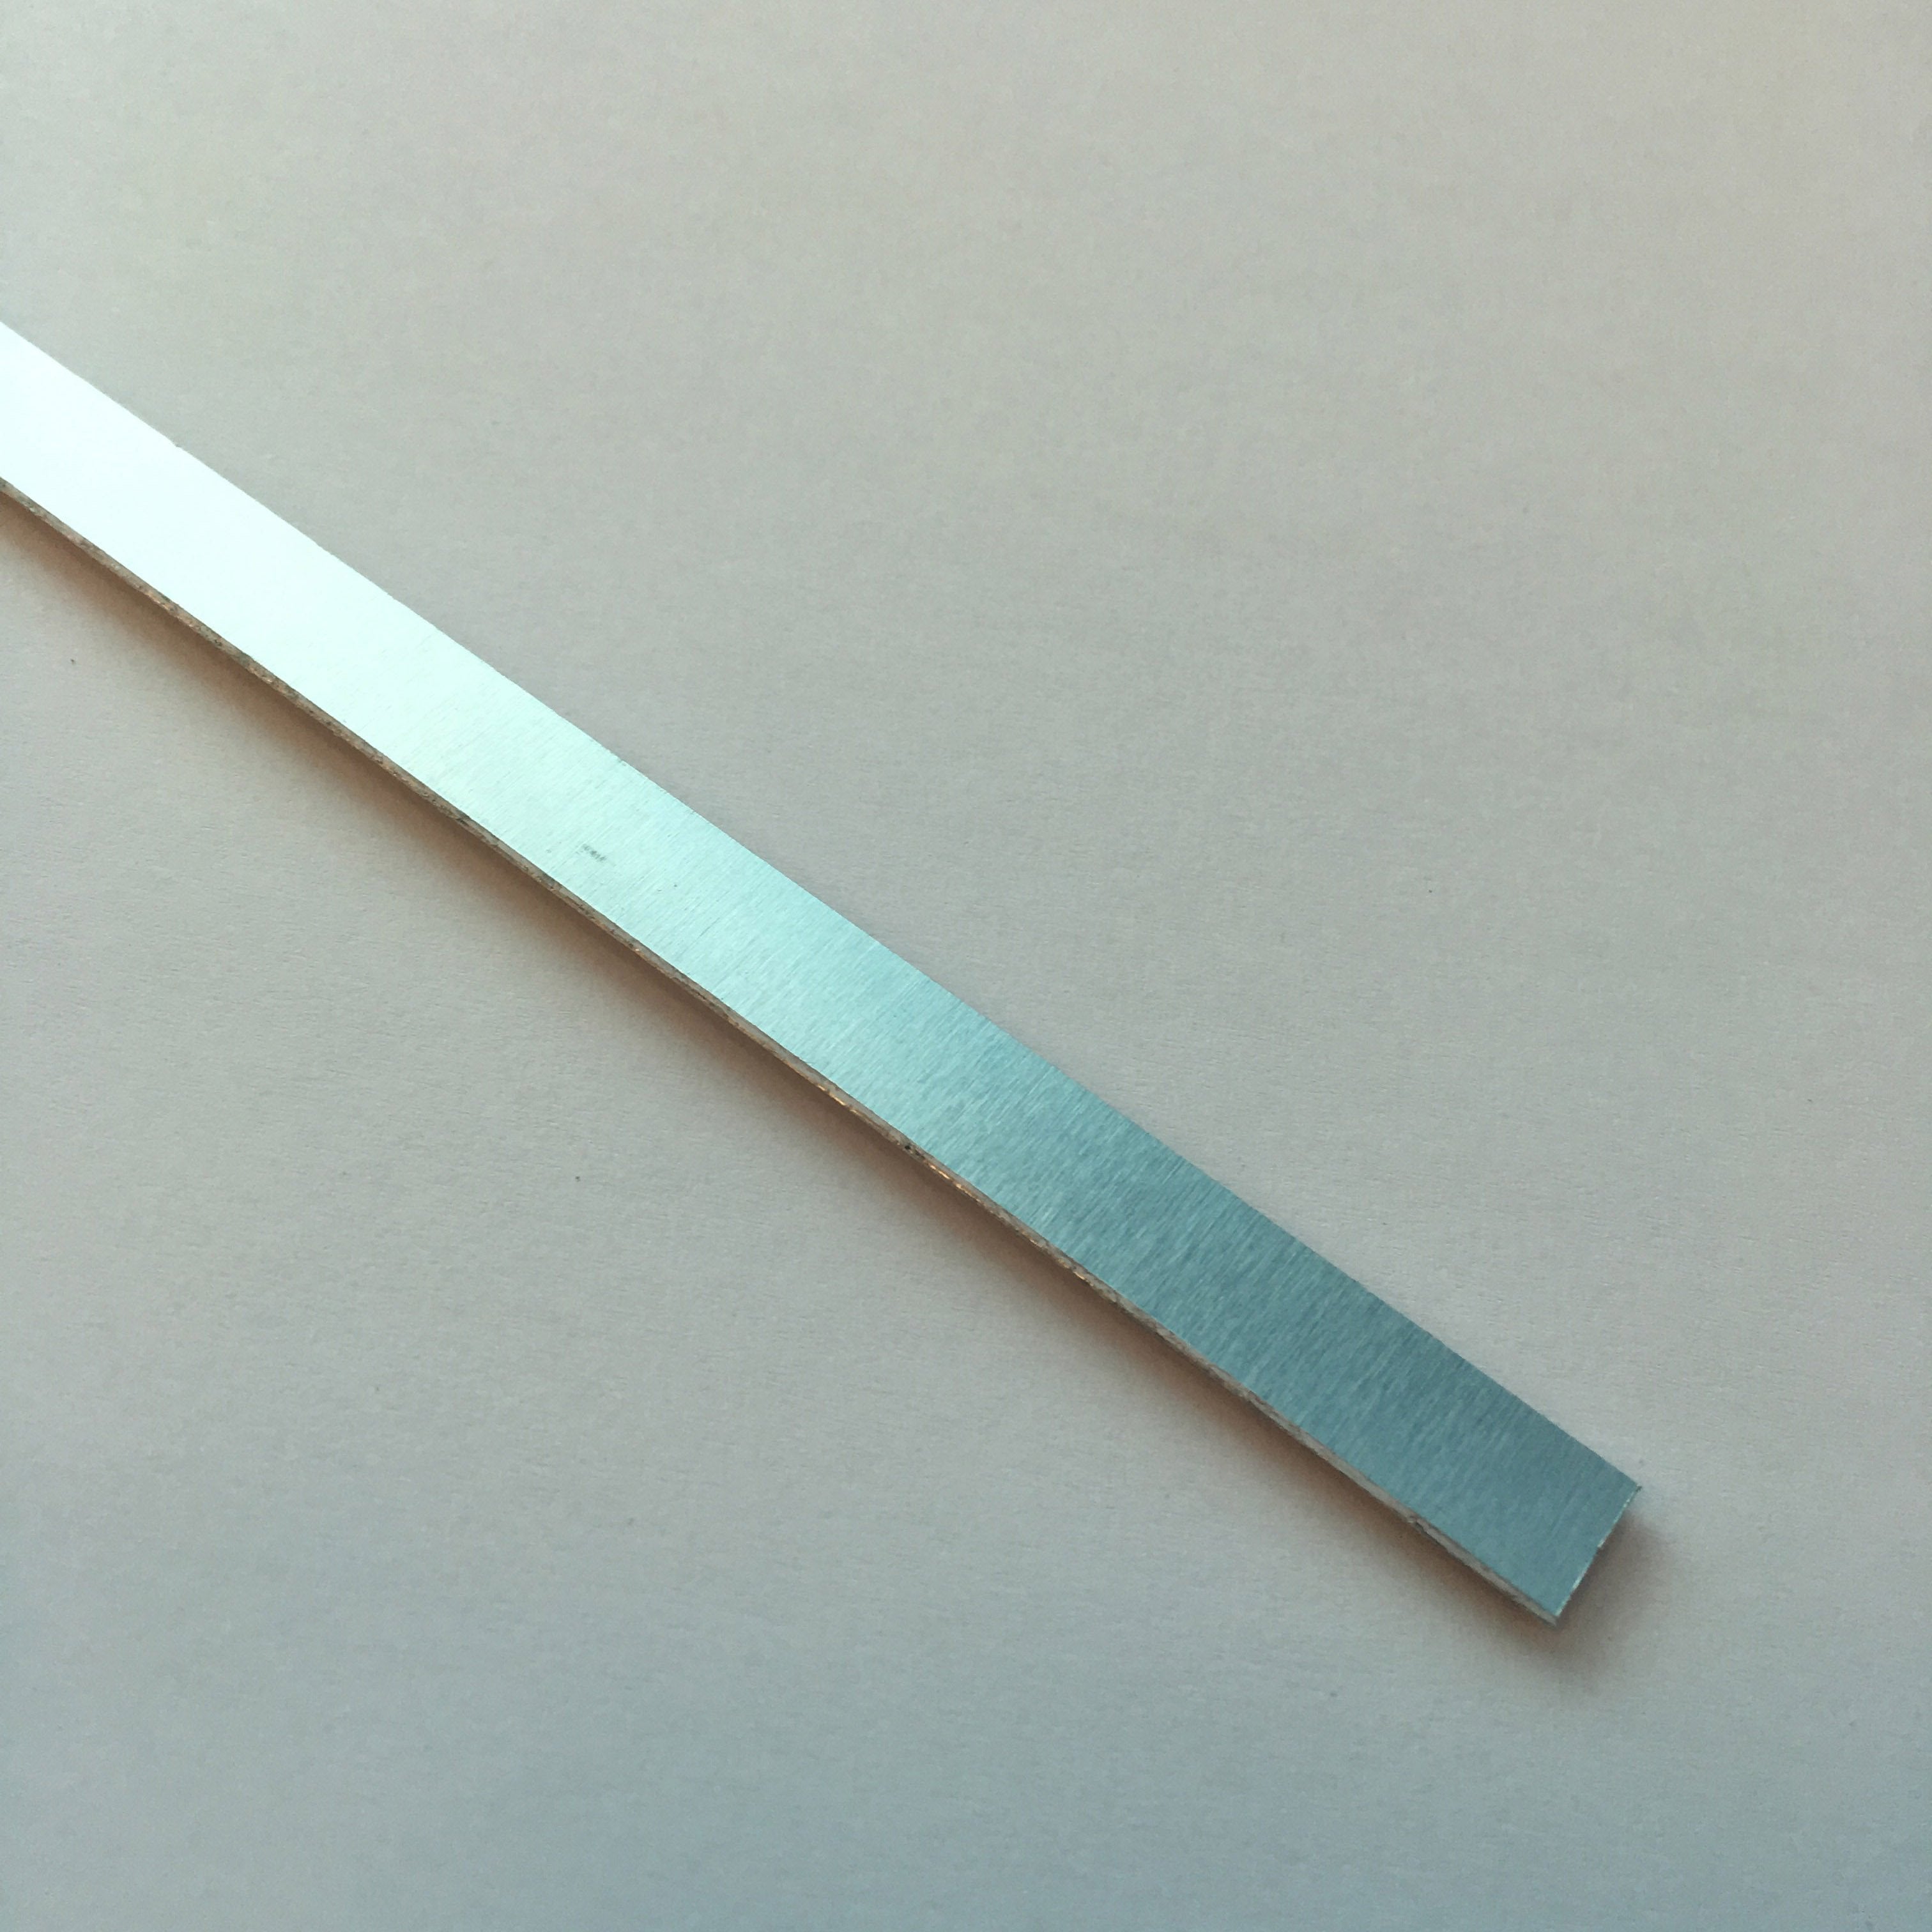 8mm wide heat sink for LED tape